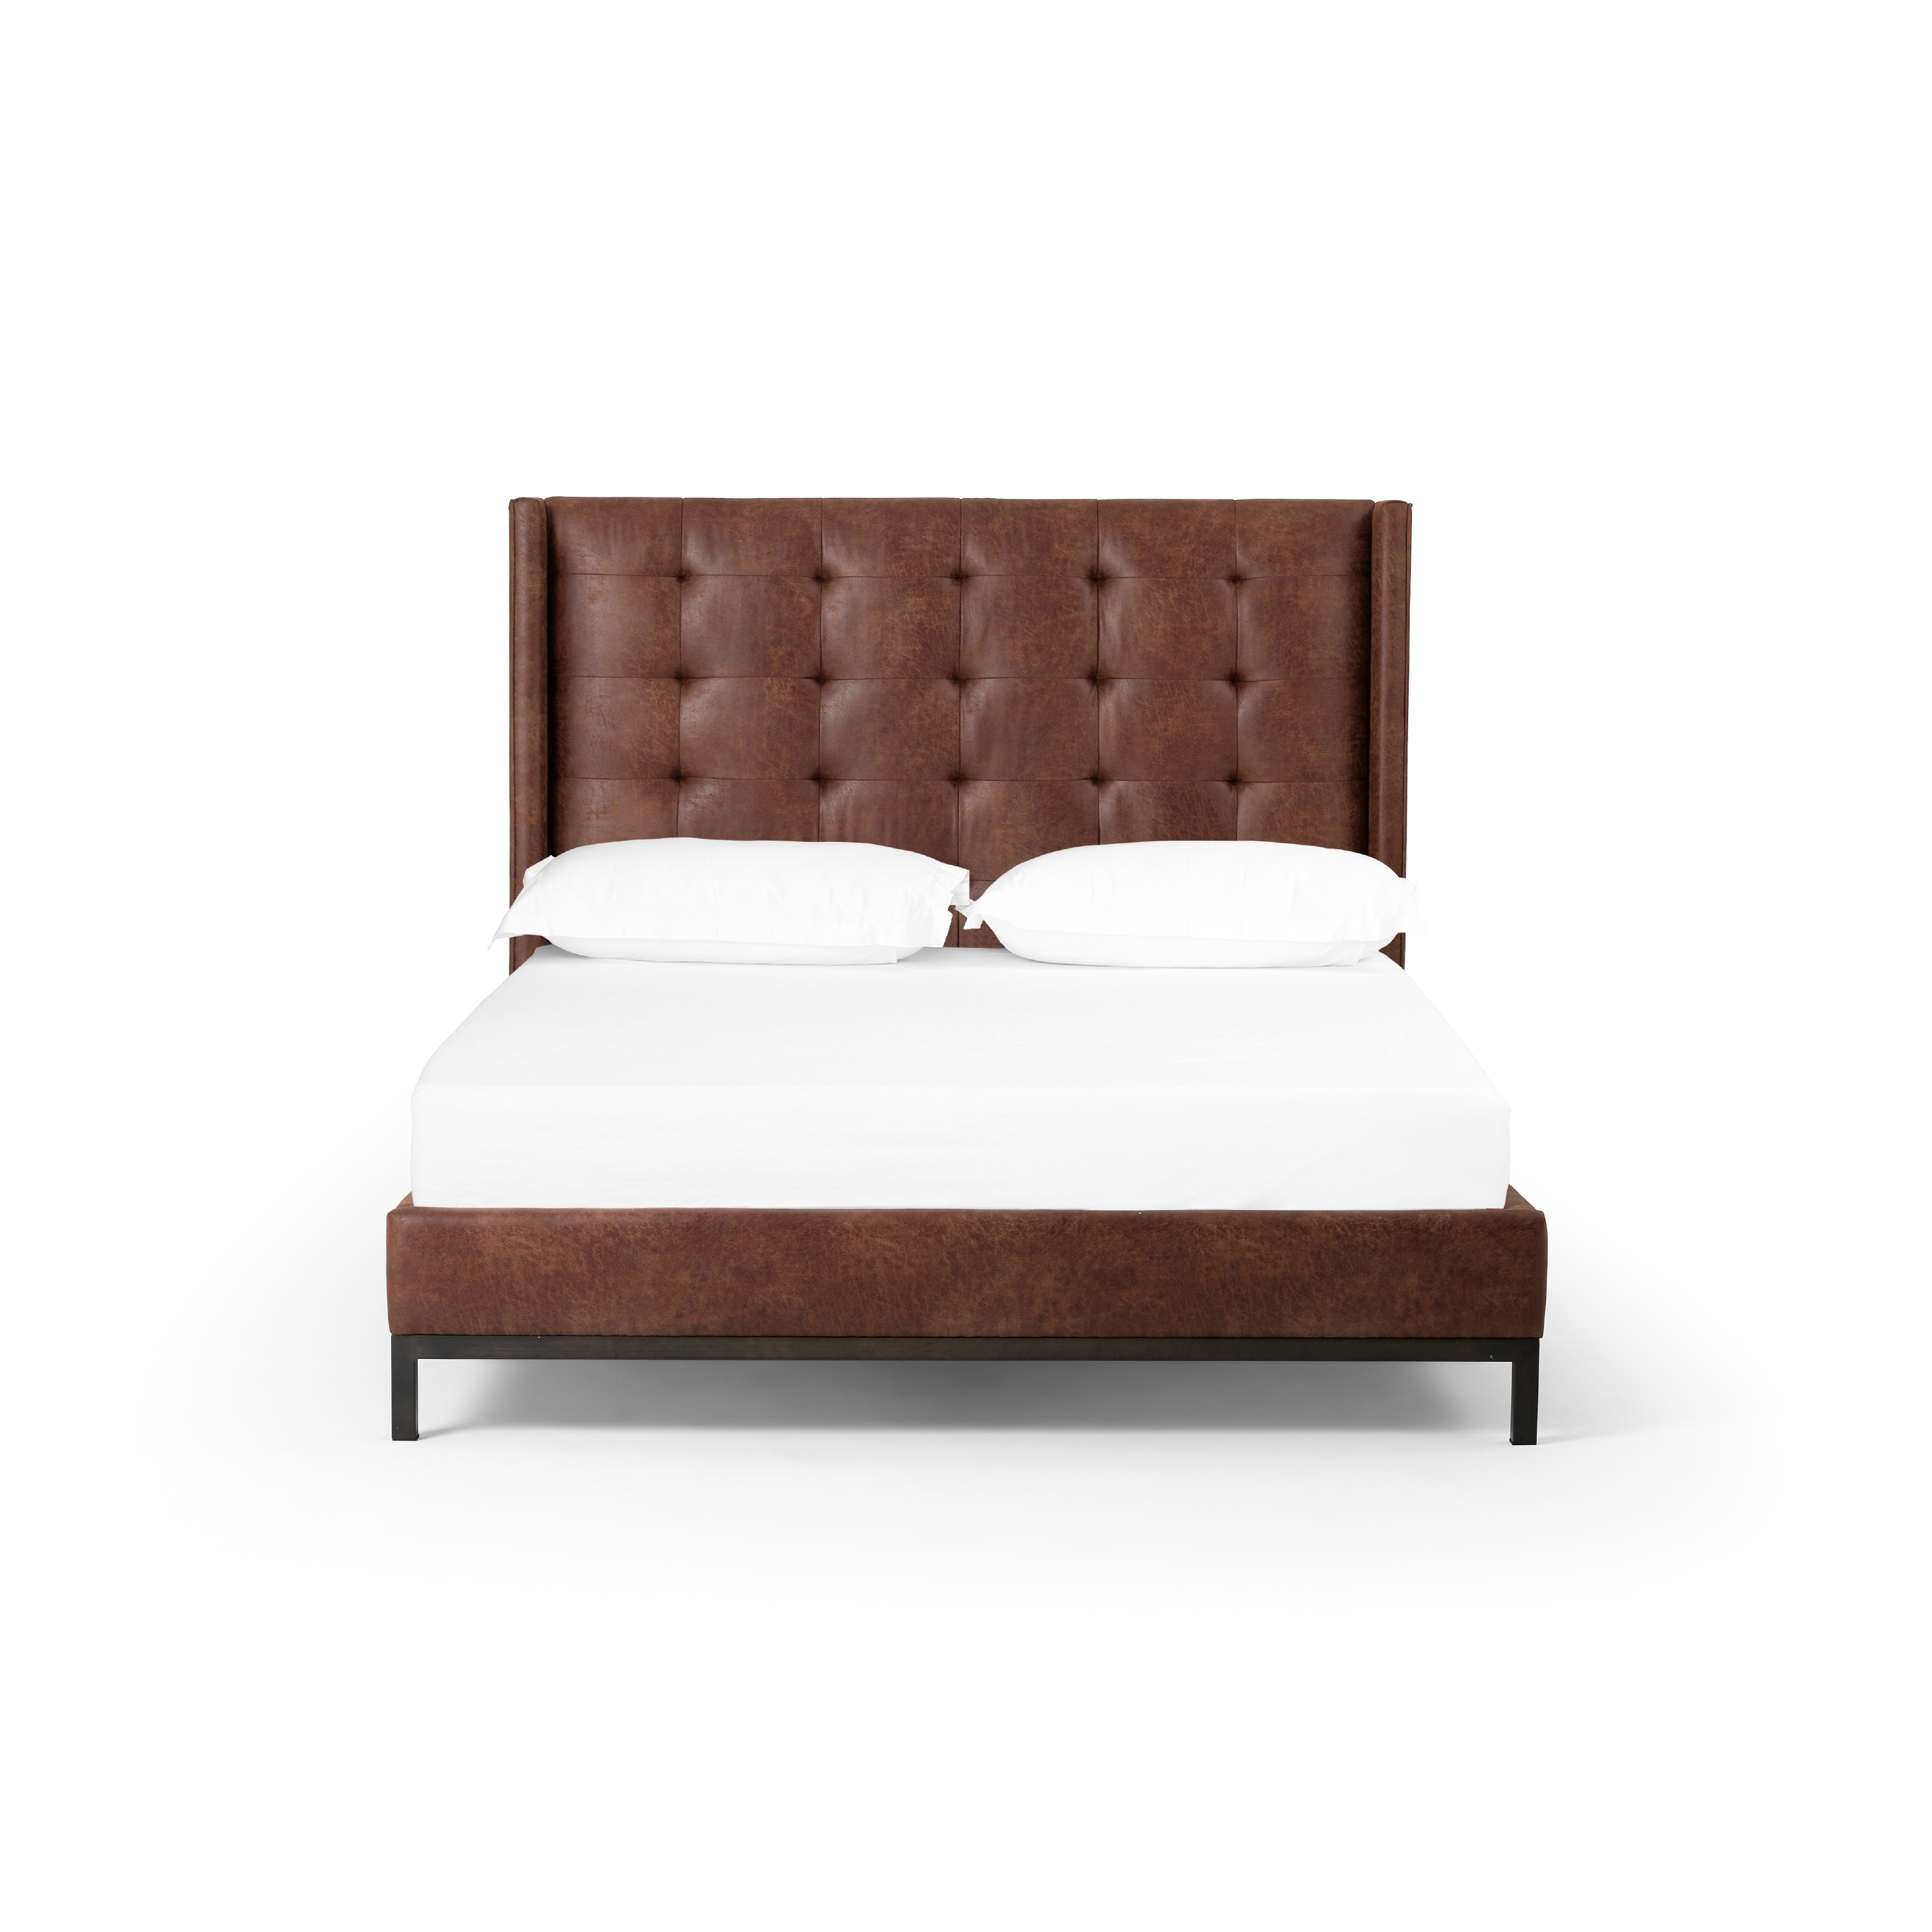 Newhall Bed - 55" - Vintage Tobacco - Image 2